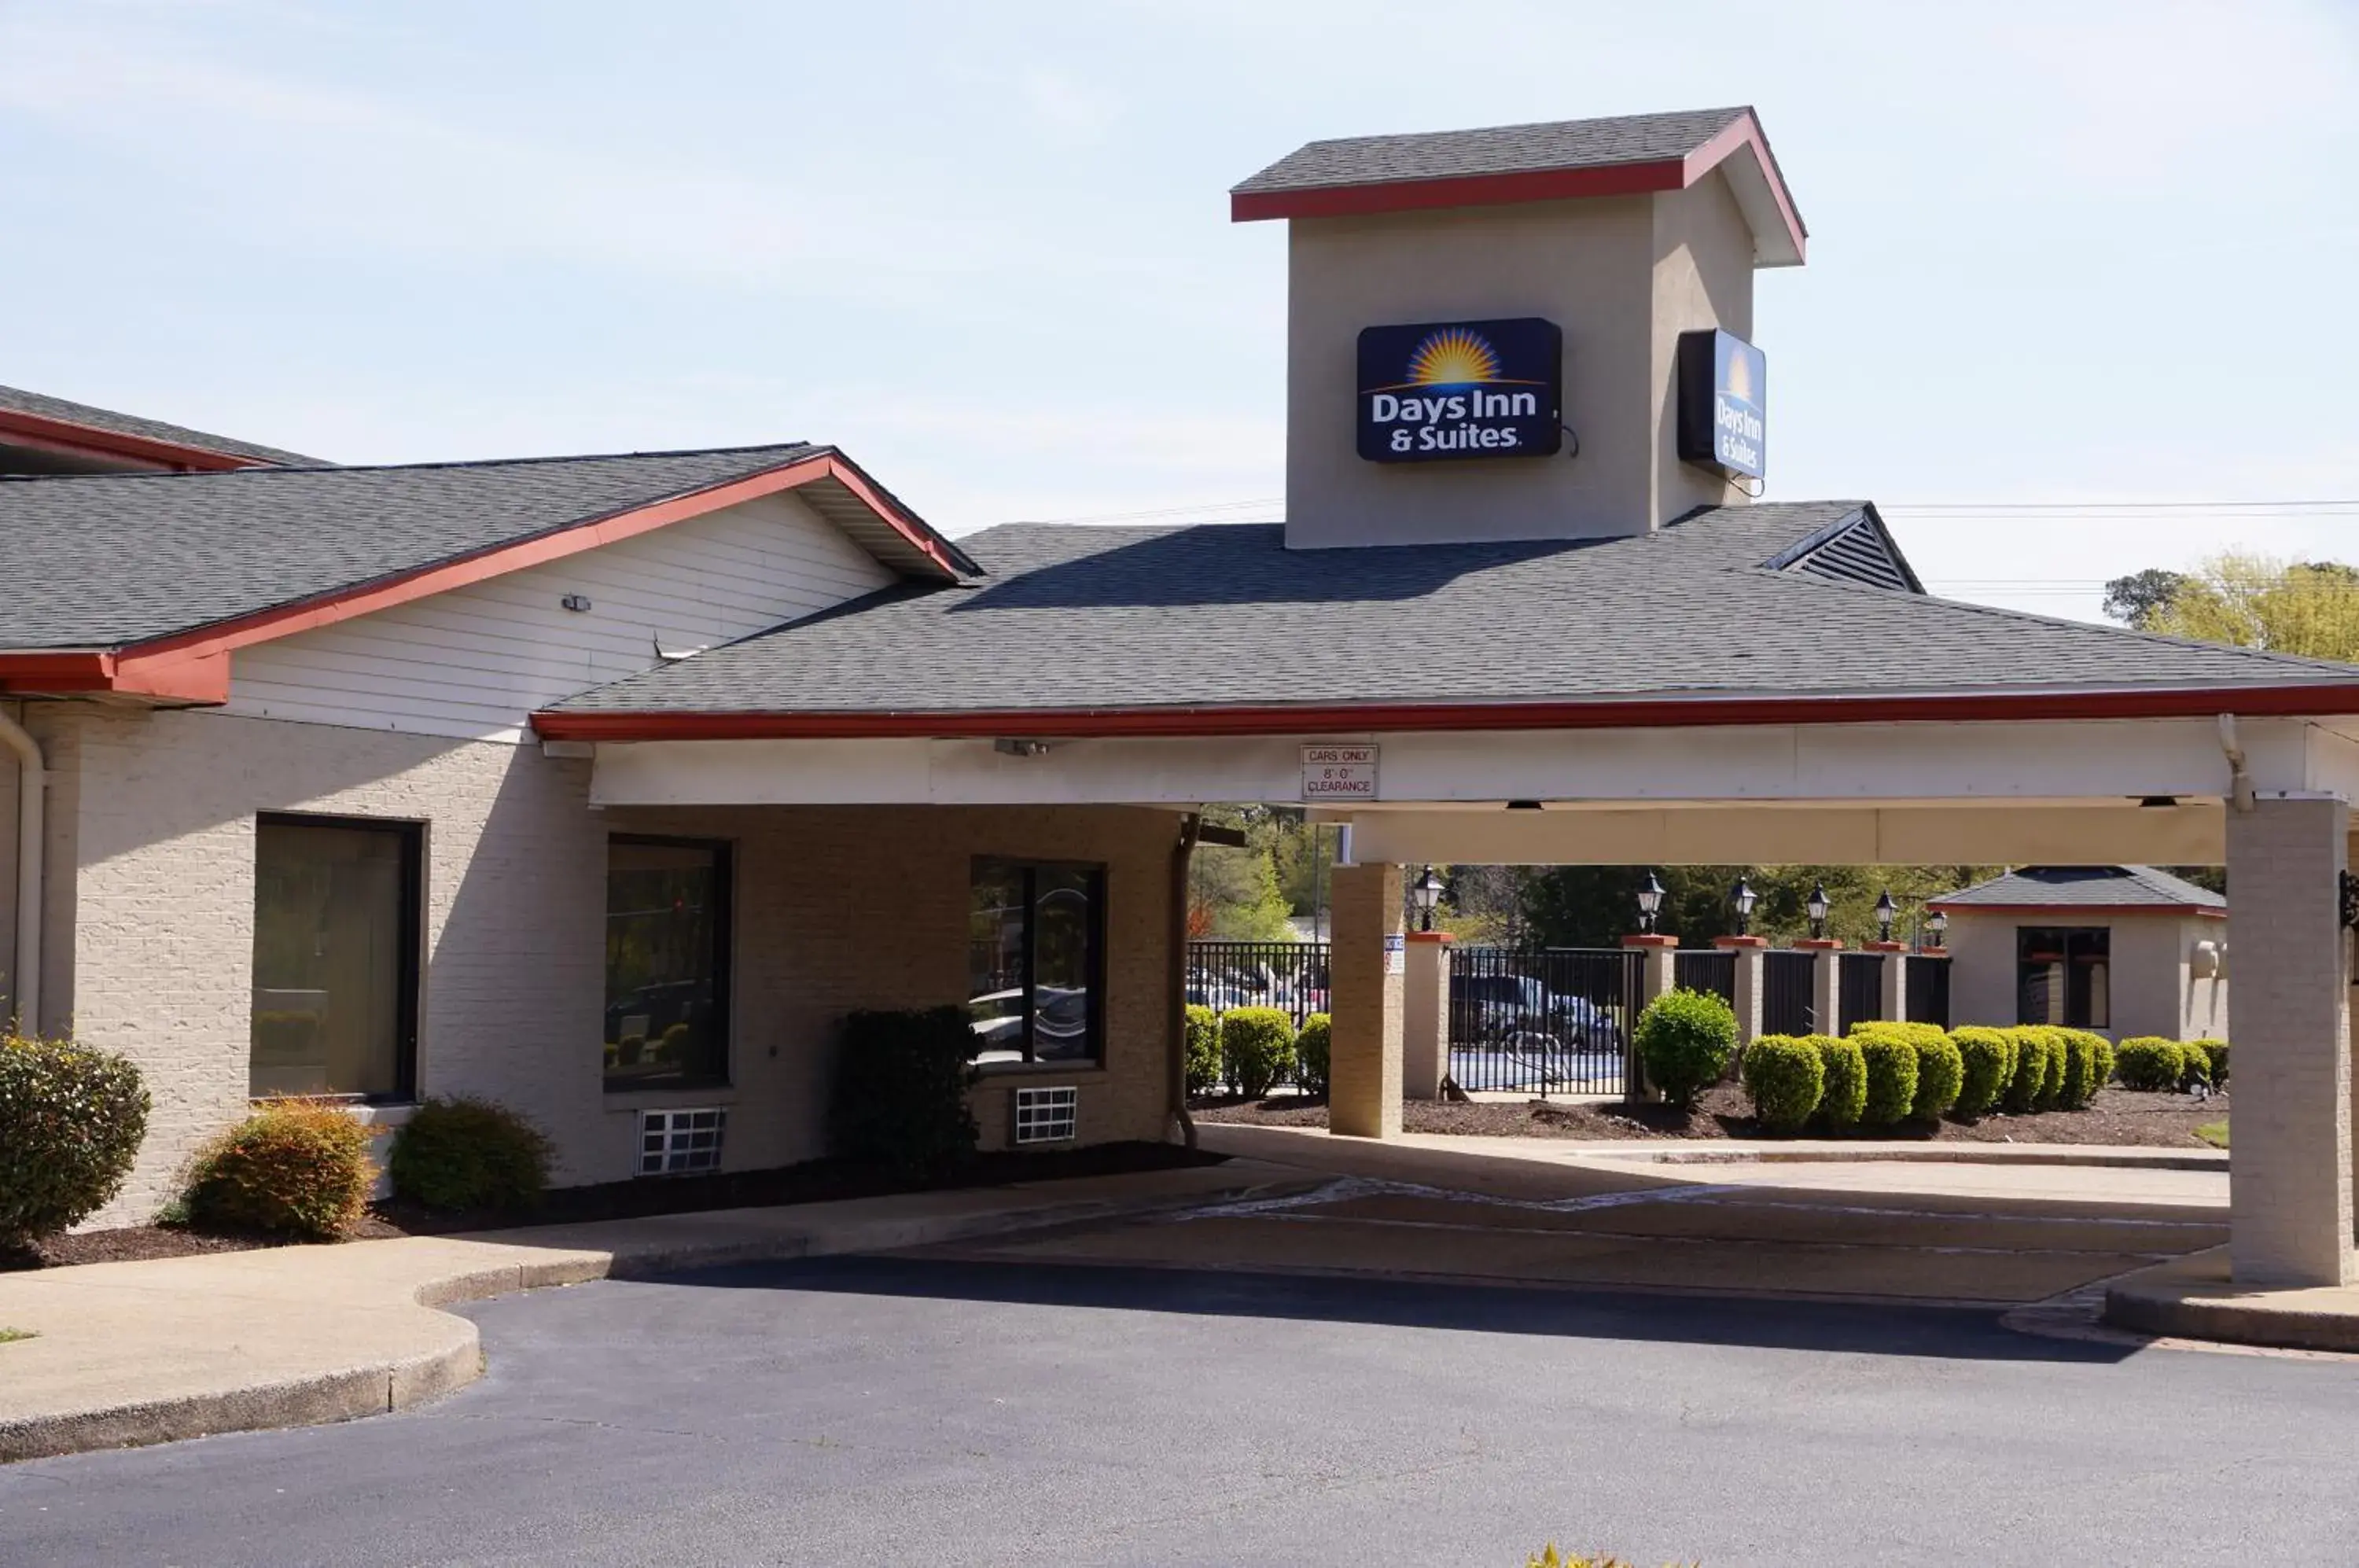 Property building in Days Inn & Suites by Wyndham Colonial